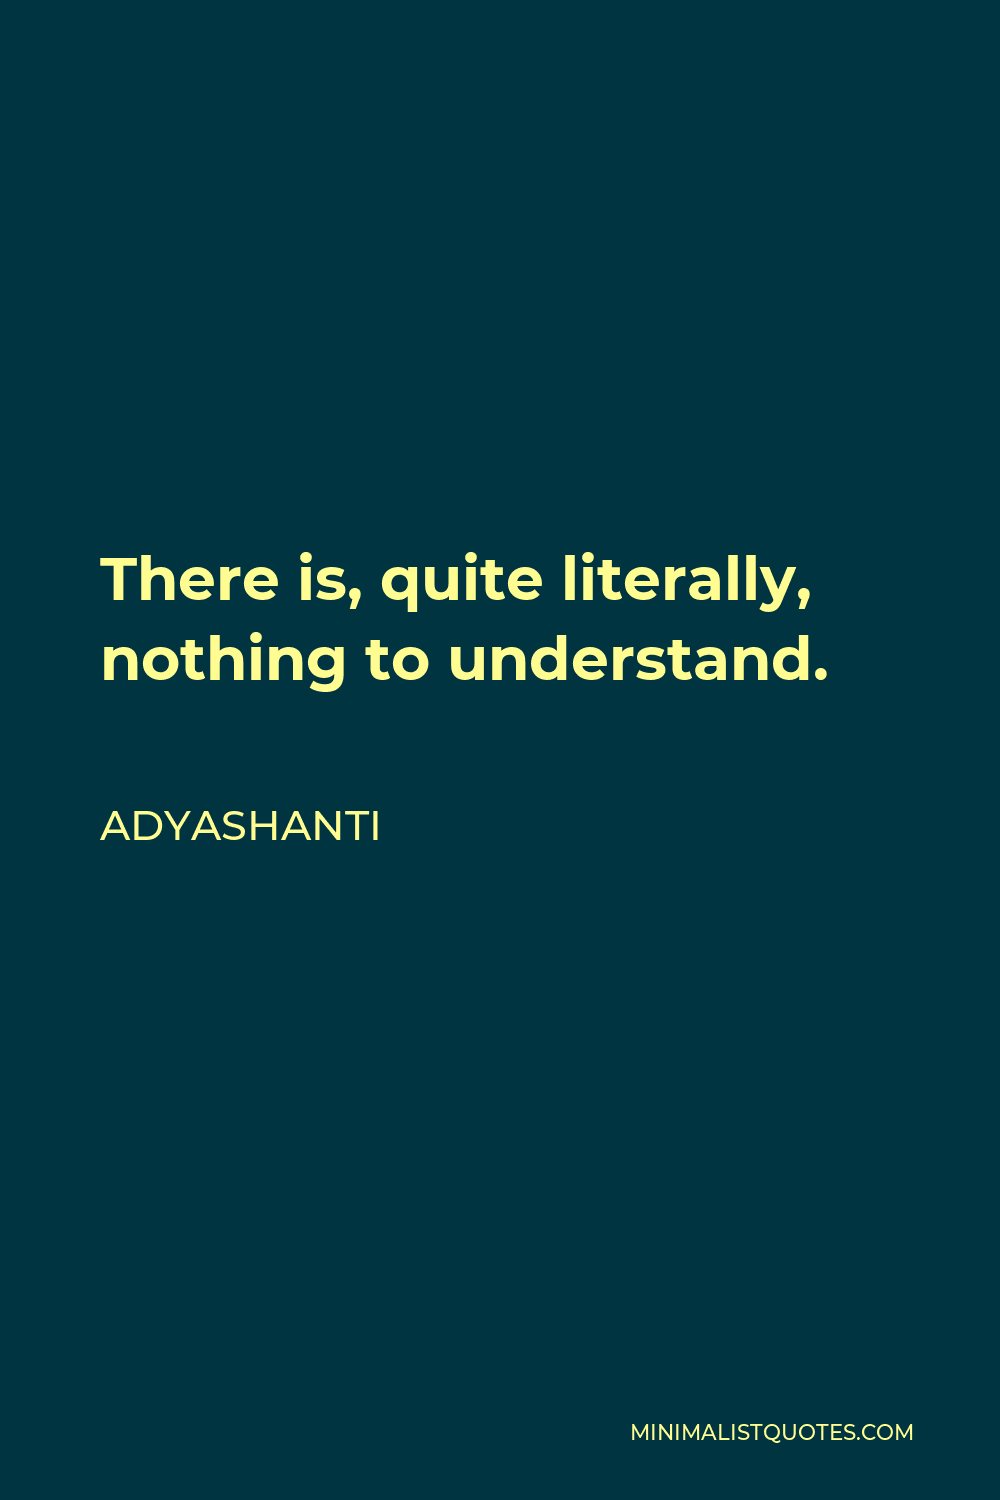 Adyashanti Quote - There is, quite literally, nothing to understand.